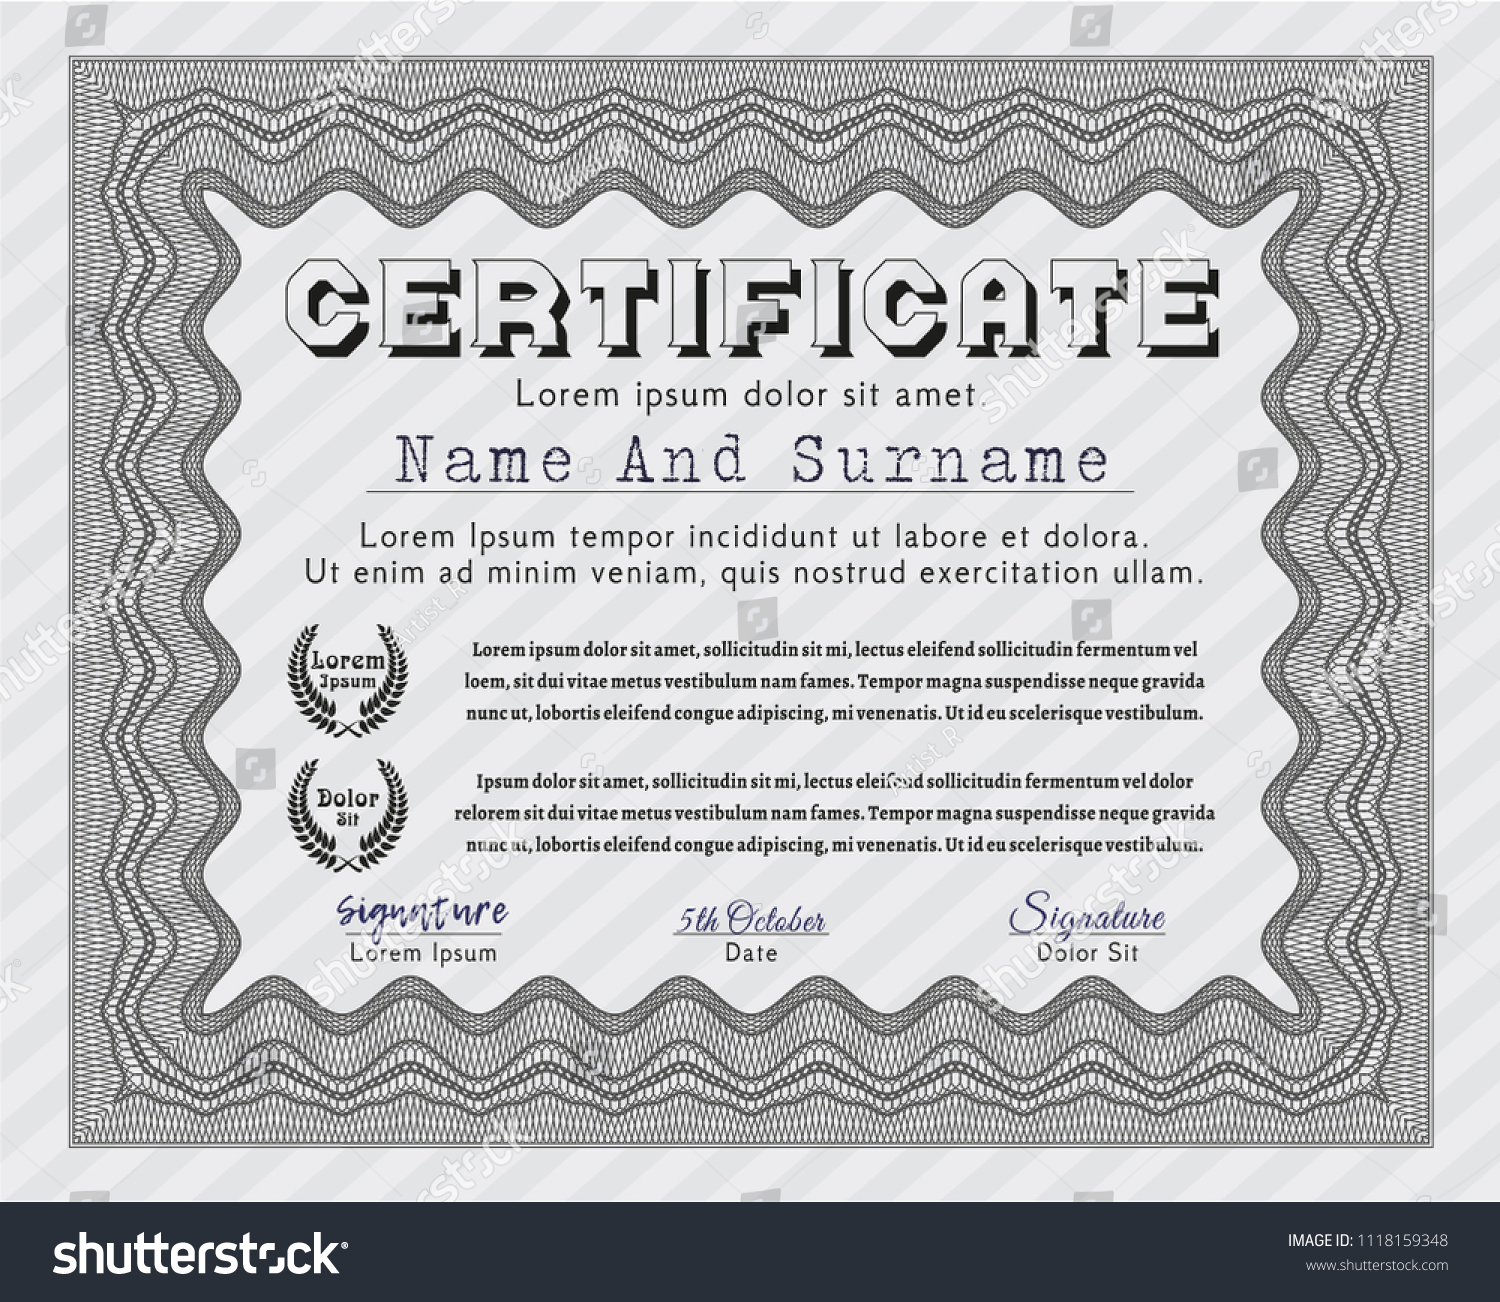 Grey Certificate of achievement template. Vector - Royalty Free Stock ...